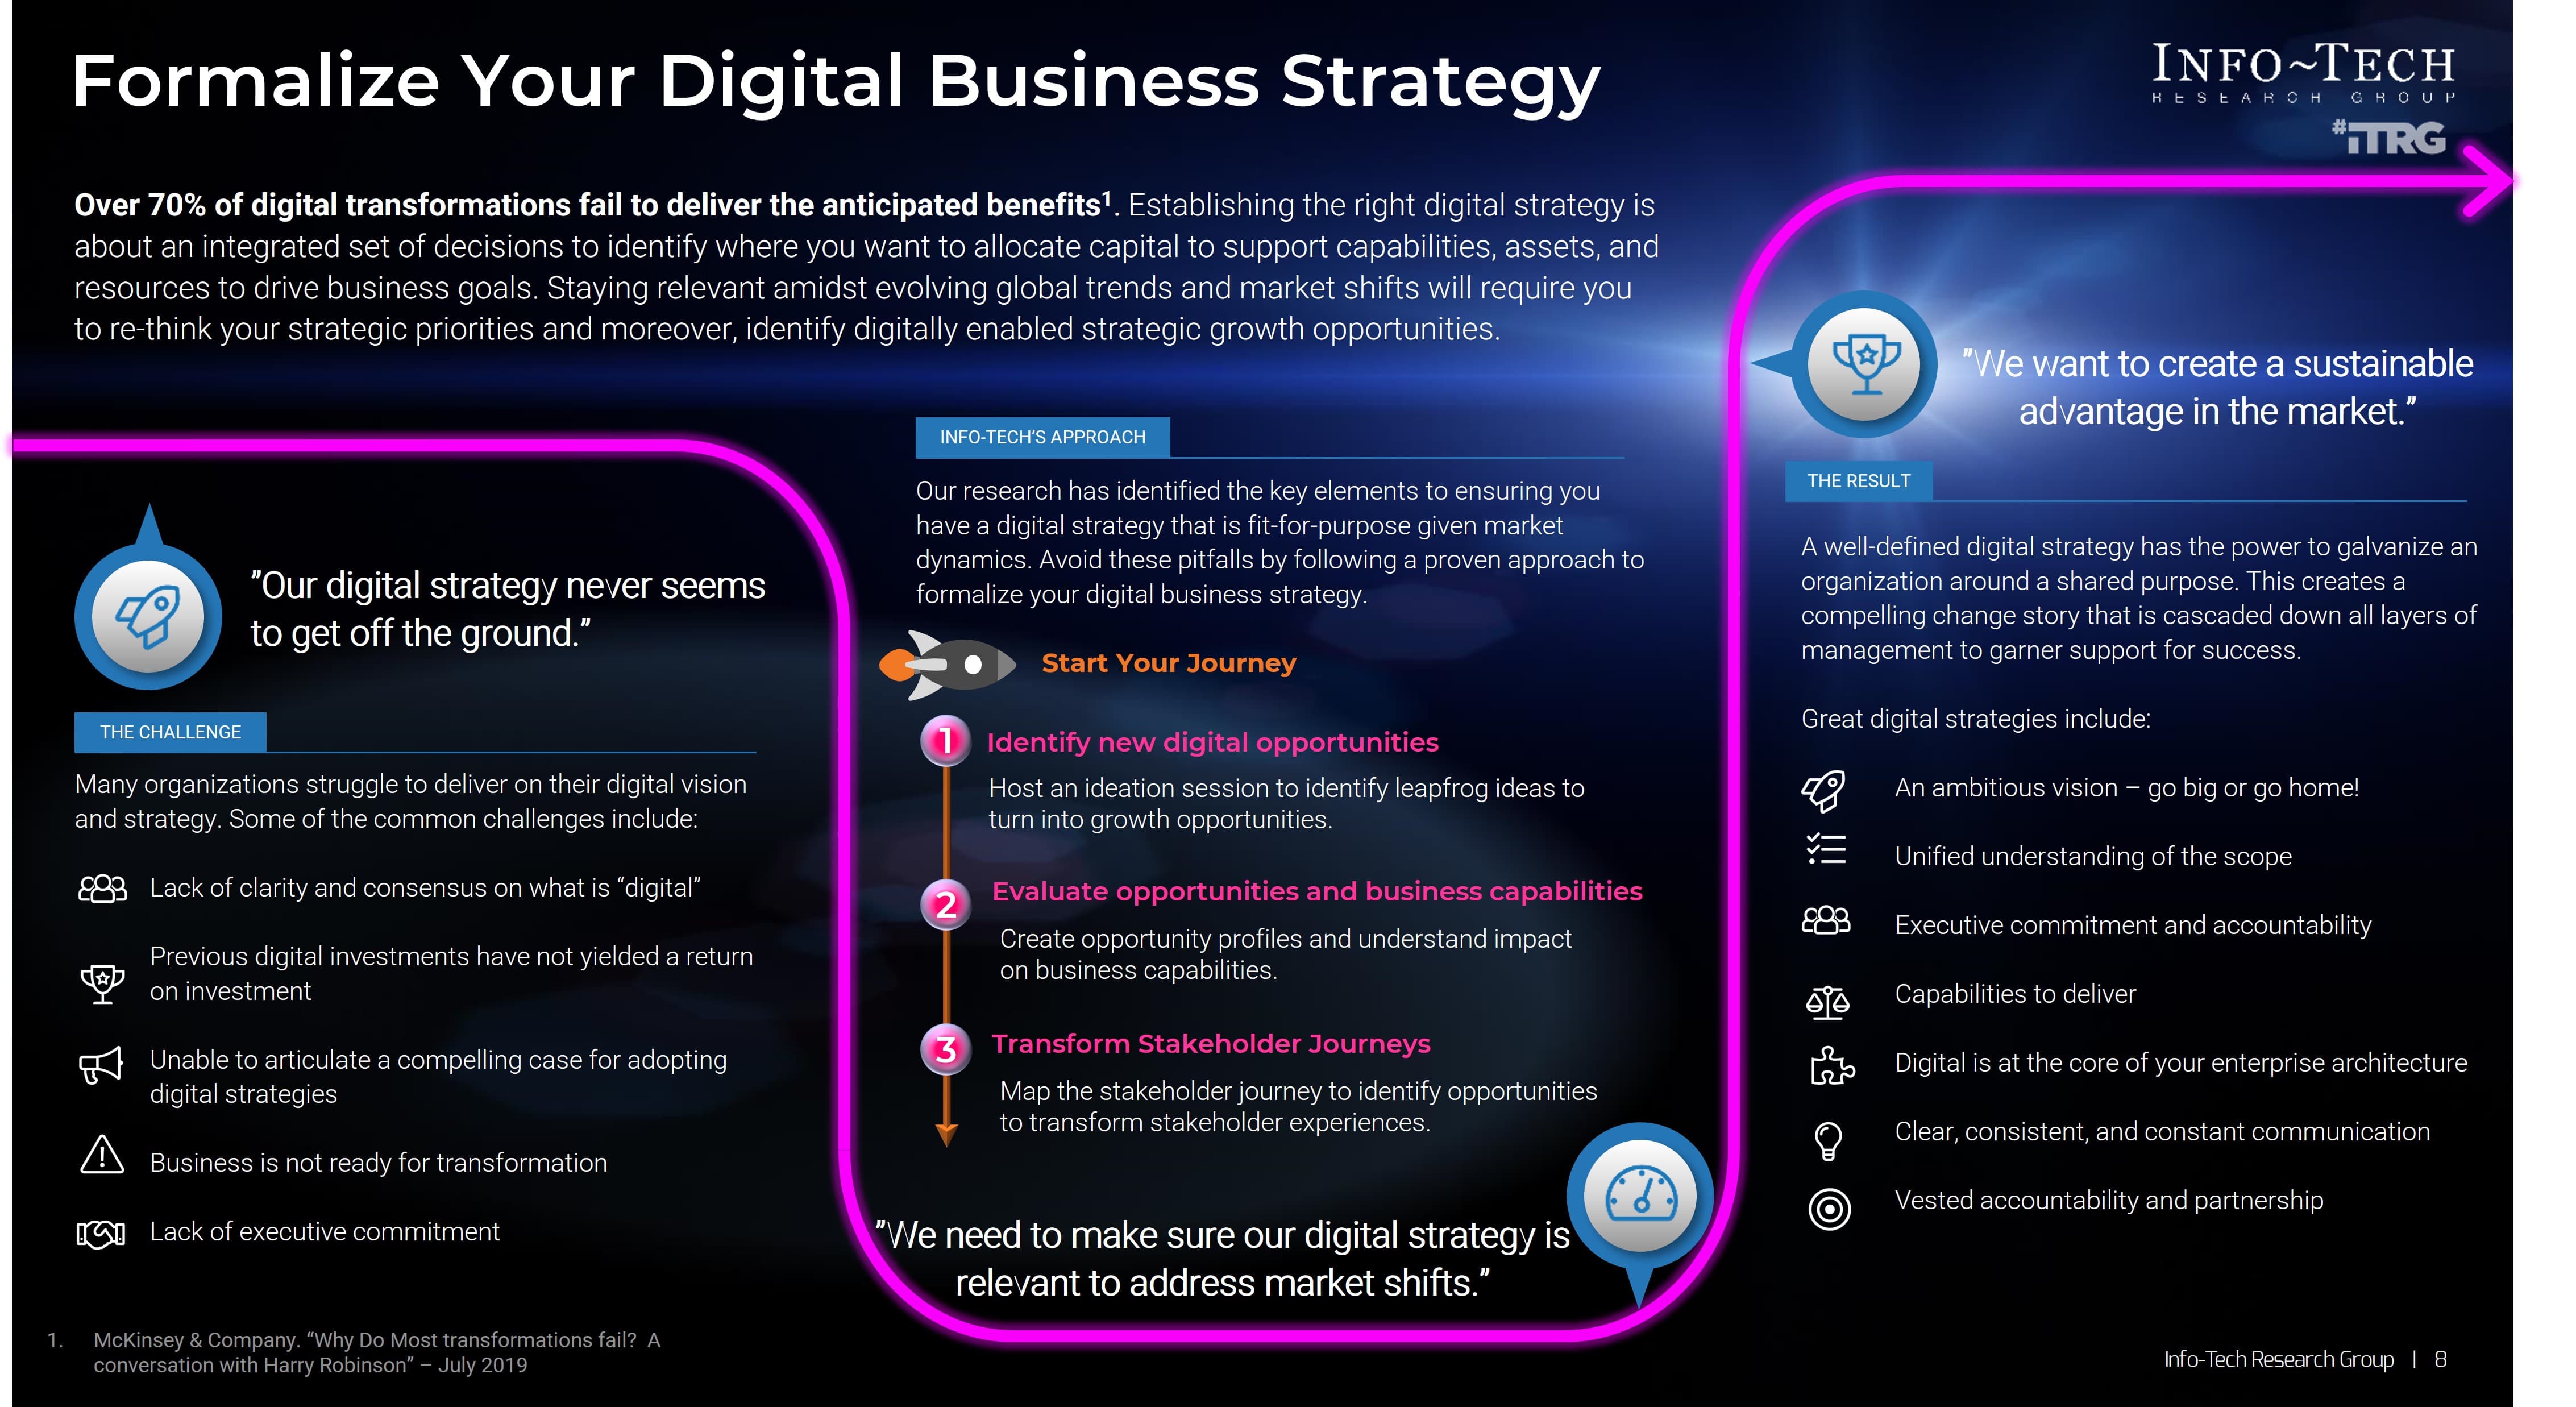 The image contains a screenshot of Formalize your digital business strategy.